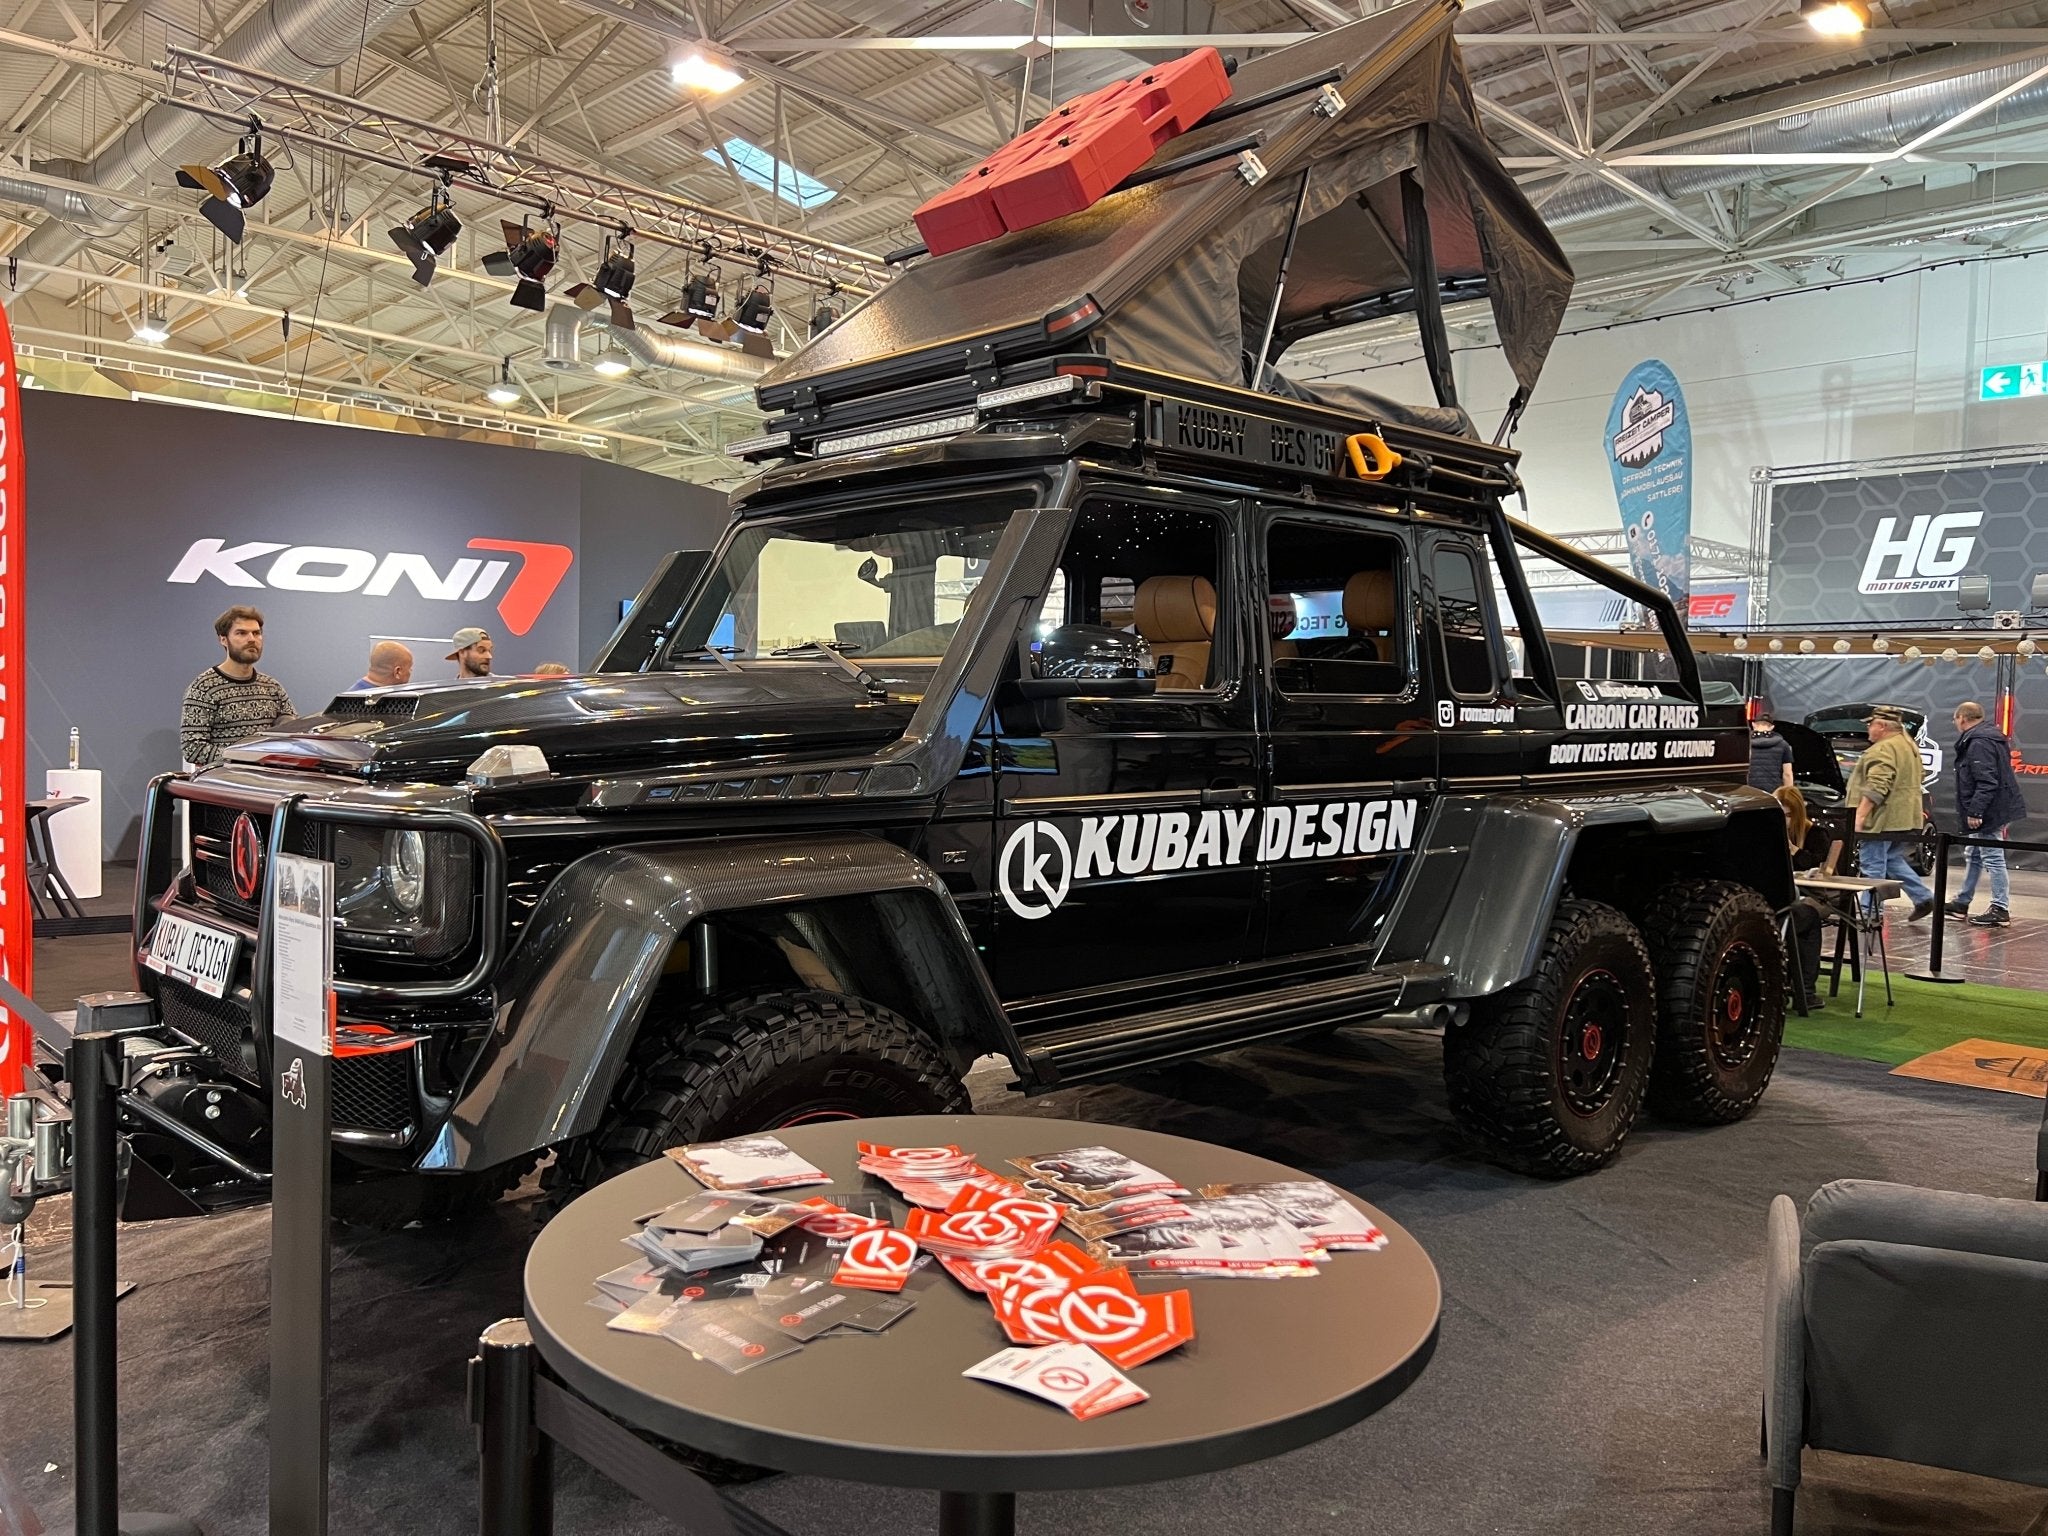 Kubay Design at Essen Motorshow! Visit us before December 10 and see our Mercedes-Benz W463 6x6 Expedition beast in real life!